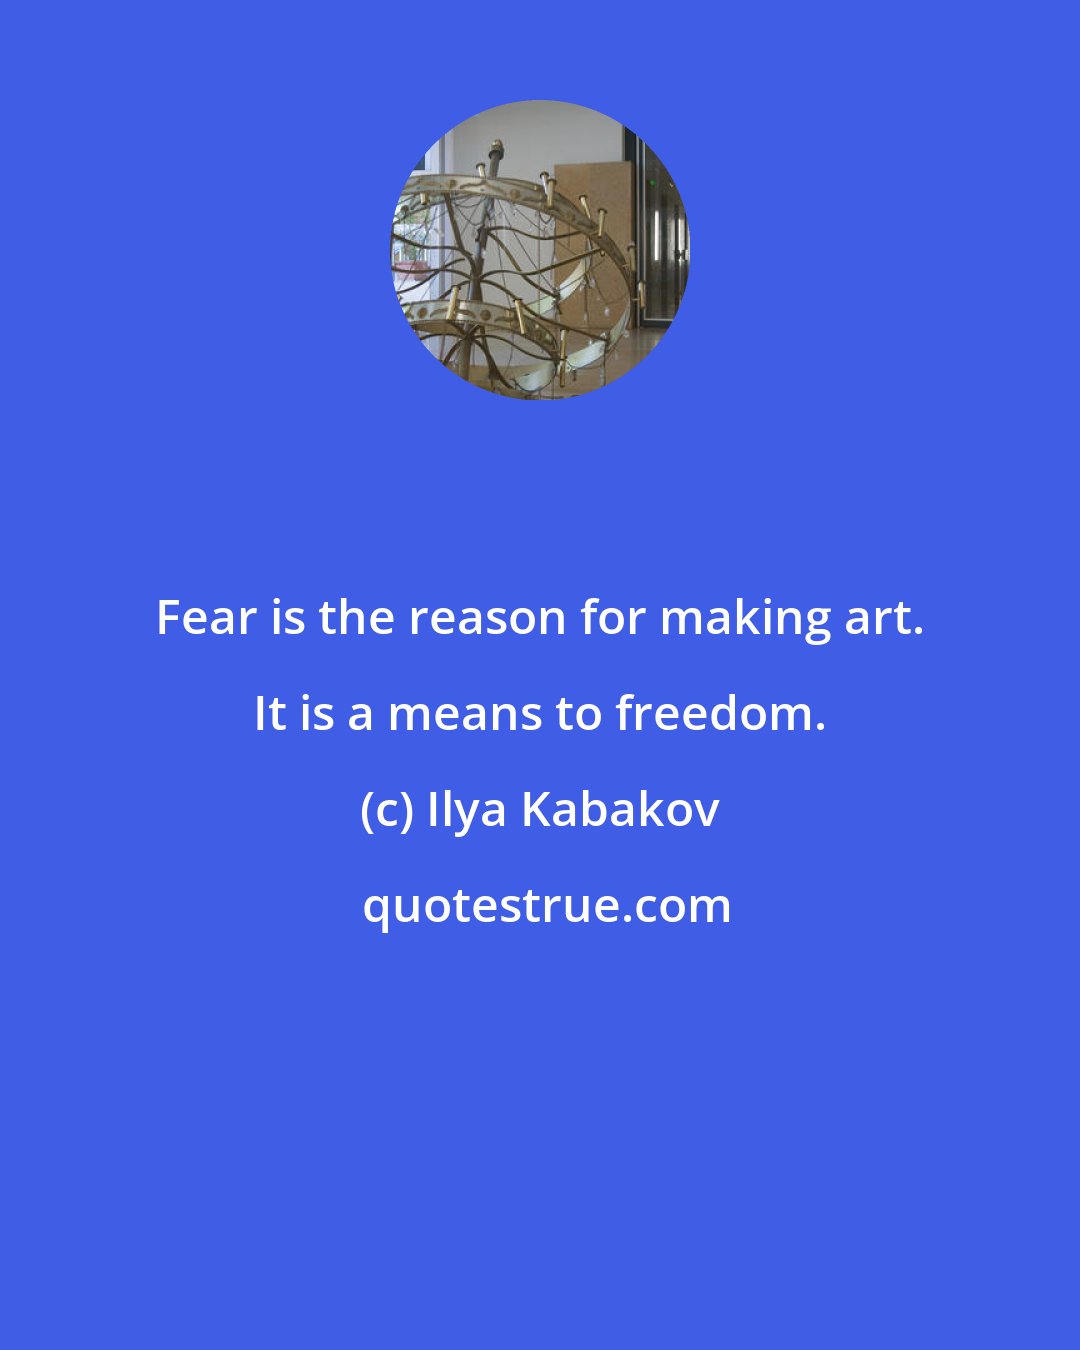 Ilya Kabakov: Fear is the reason for making art. It is a means to freedom.